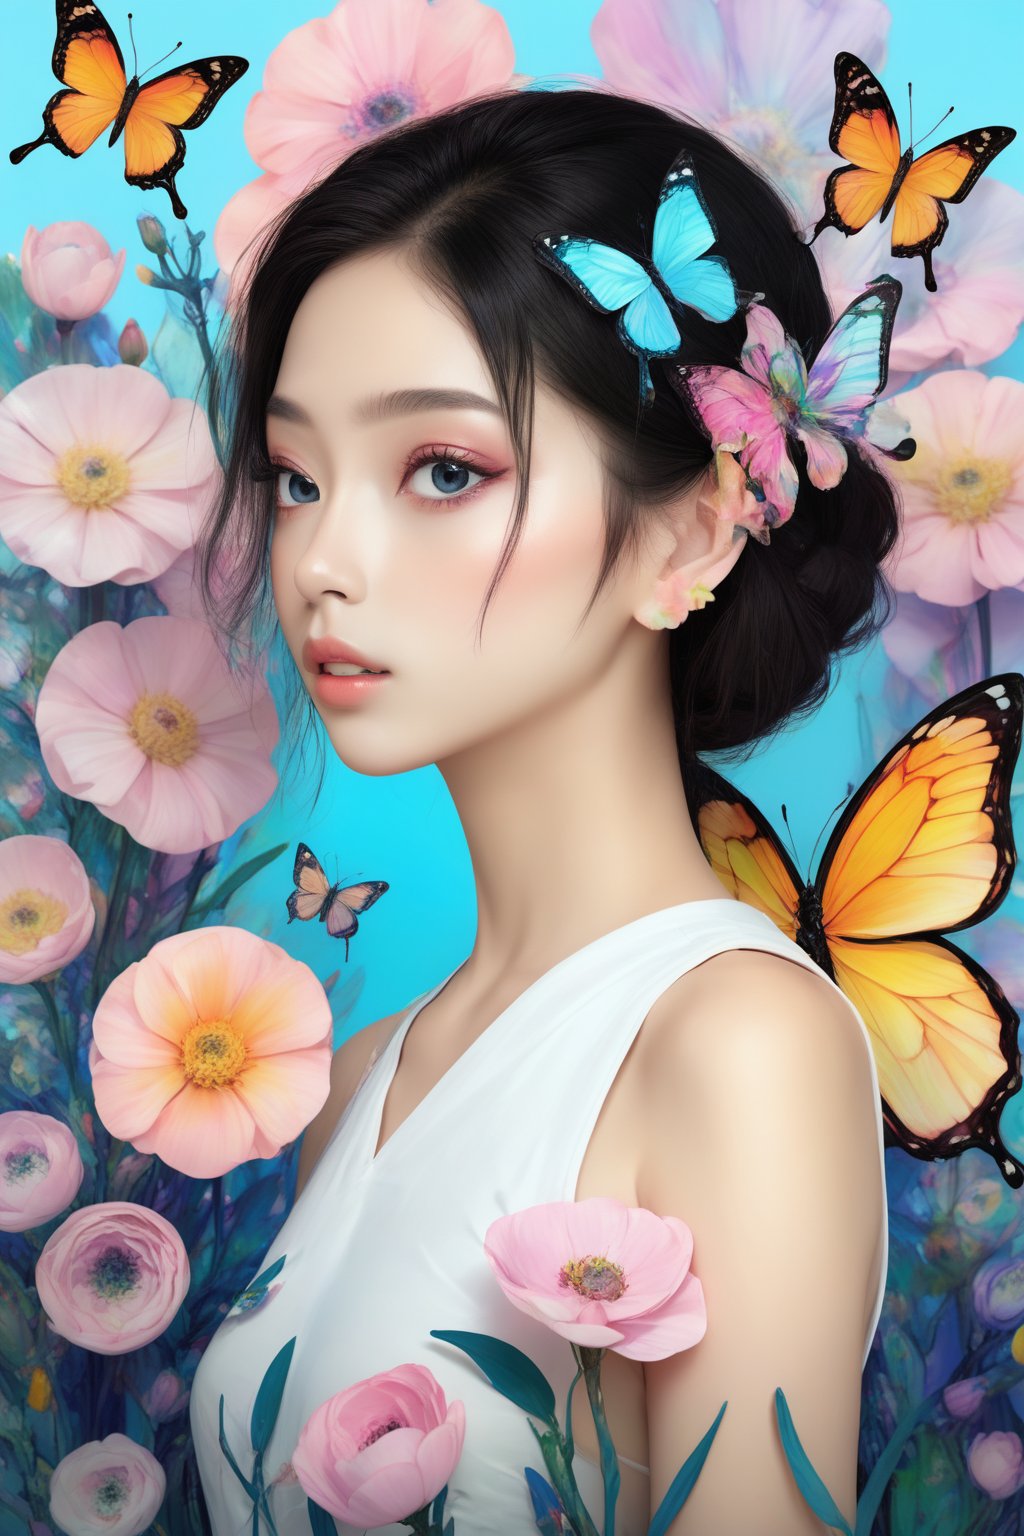 (masterpiece:1.1),(highest quality:1.1),(HDR:1),ambient light,ultra-high quality,( ultra detailed original illustration),(1girl, upper body),((harajuku fashion)),((flowers with human eyes, flower eyes)),double exposure,fusion of fluid abstract art,glitch,(original illustration composition),(fusion of limited color, maximalism artstyle, geometric artstyle, butterflies, junk art),more detail XL,Perfect skin,Retouch all bugs